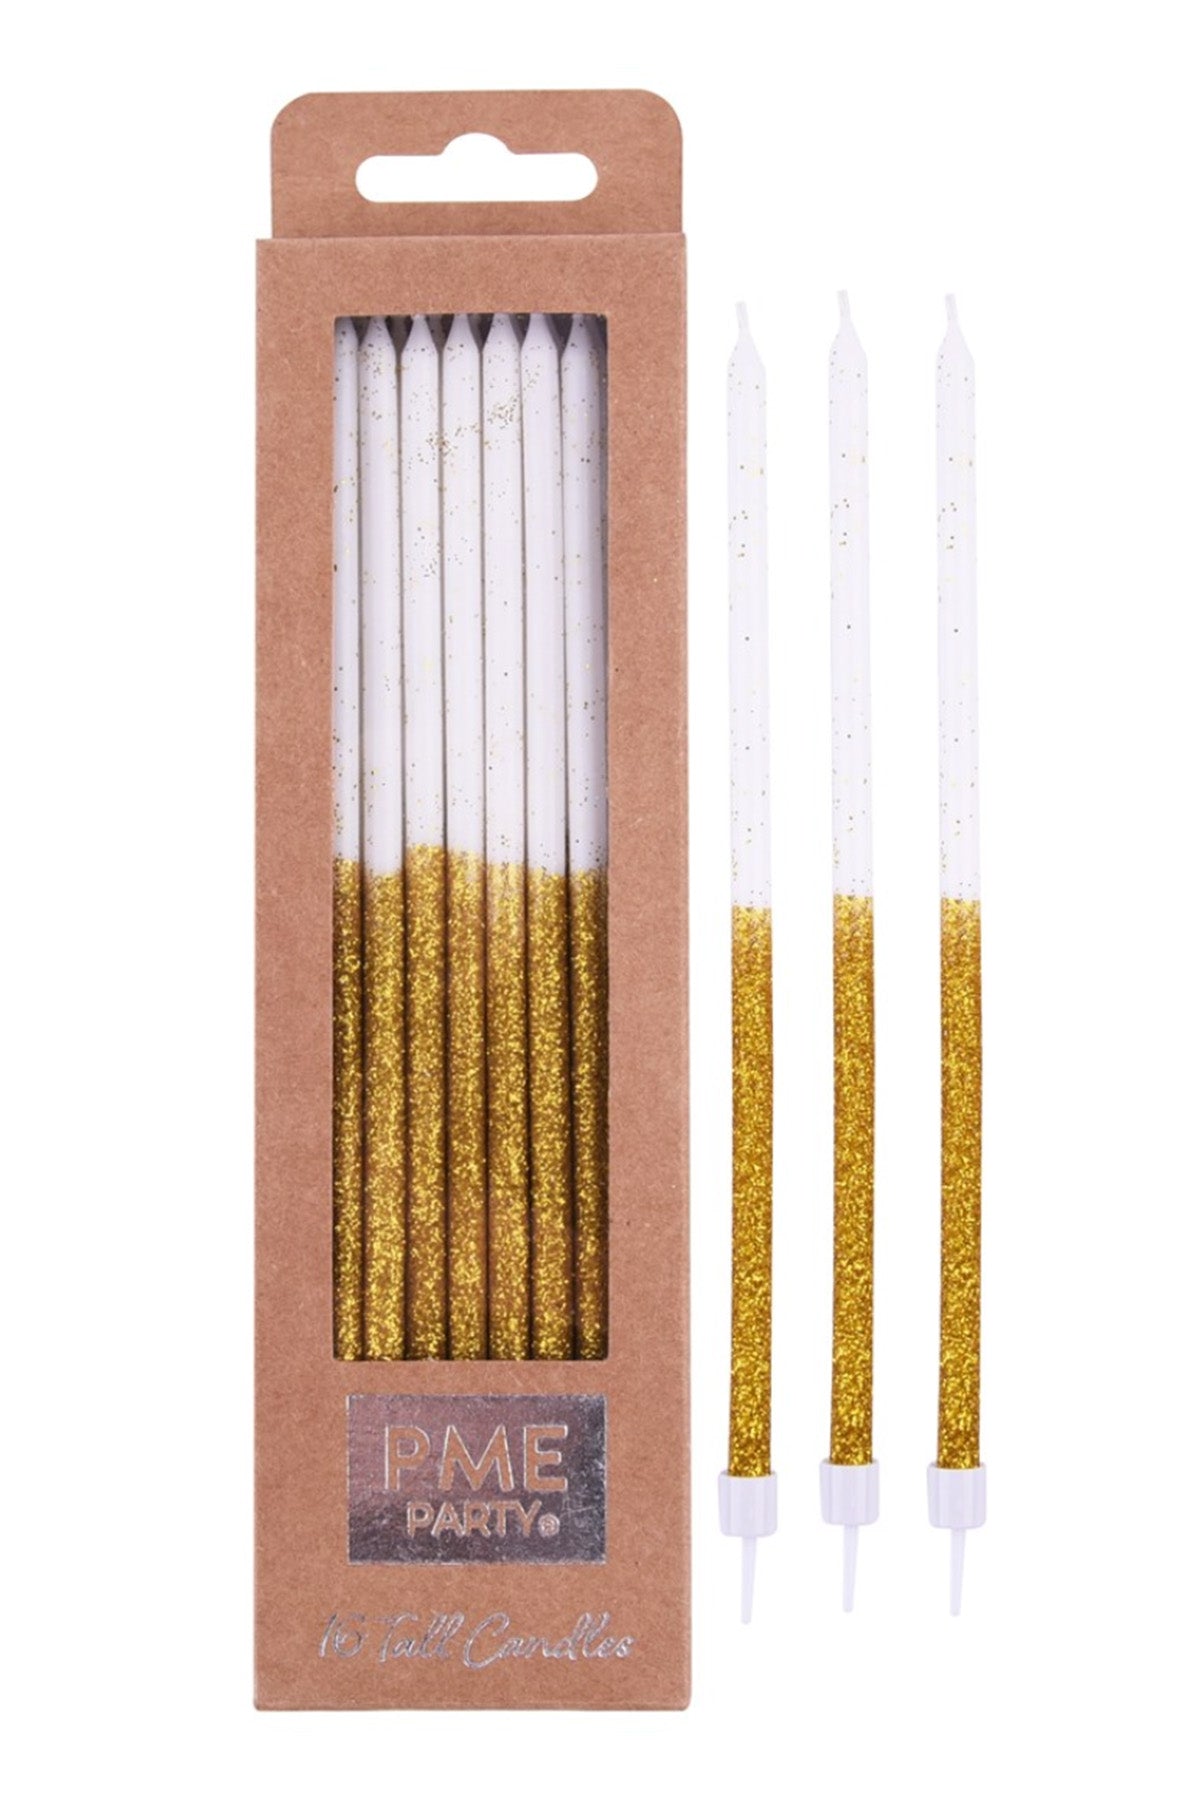 Candles - Gold Glitter Extra Tall W/ Holders (7") - Pk/16 Birthday Candles PME 